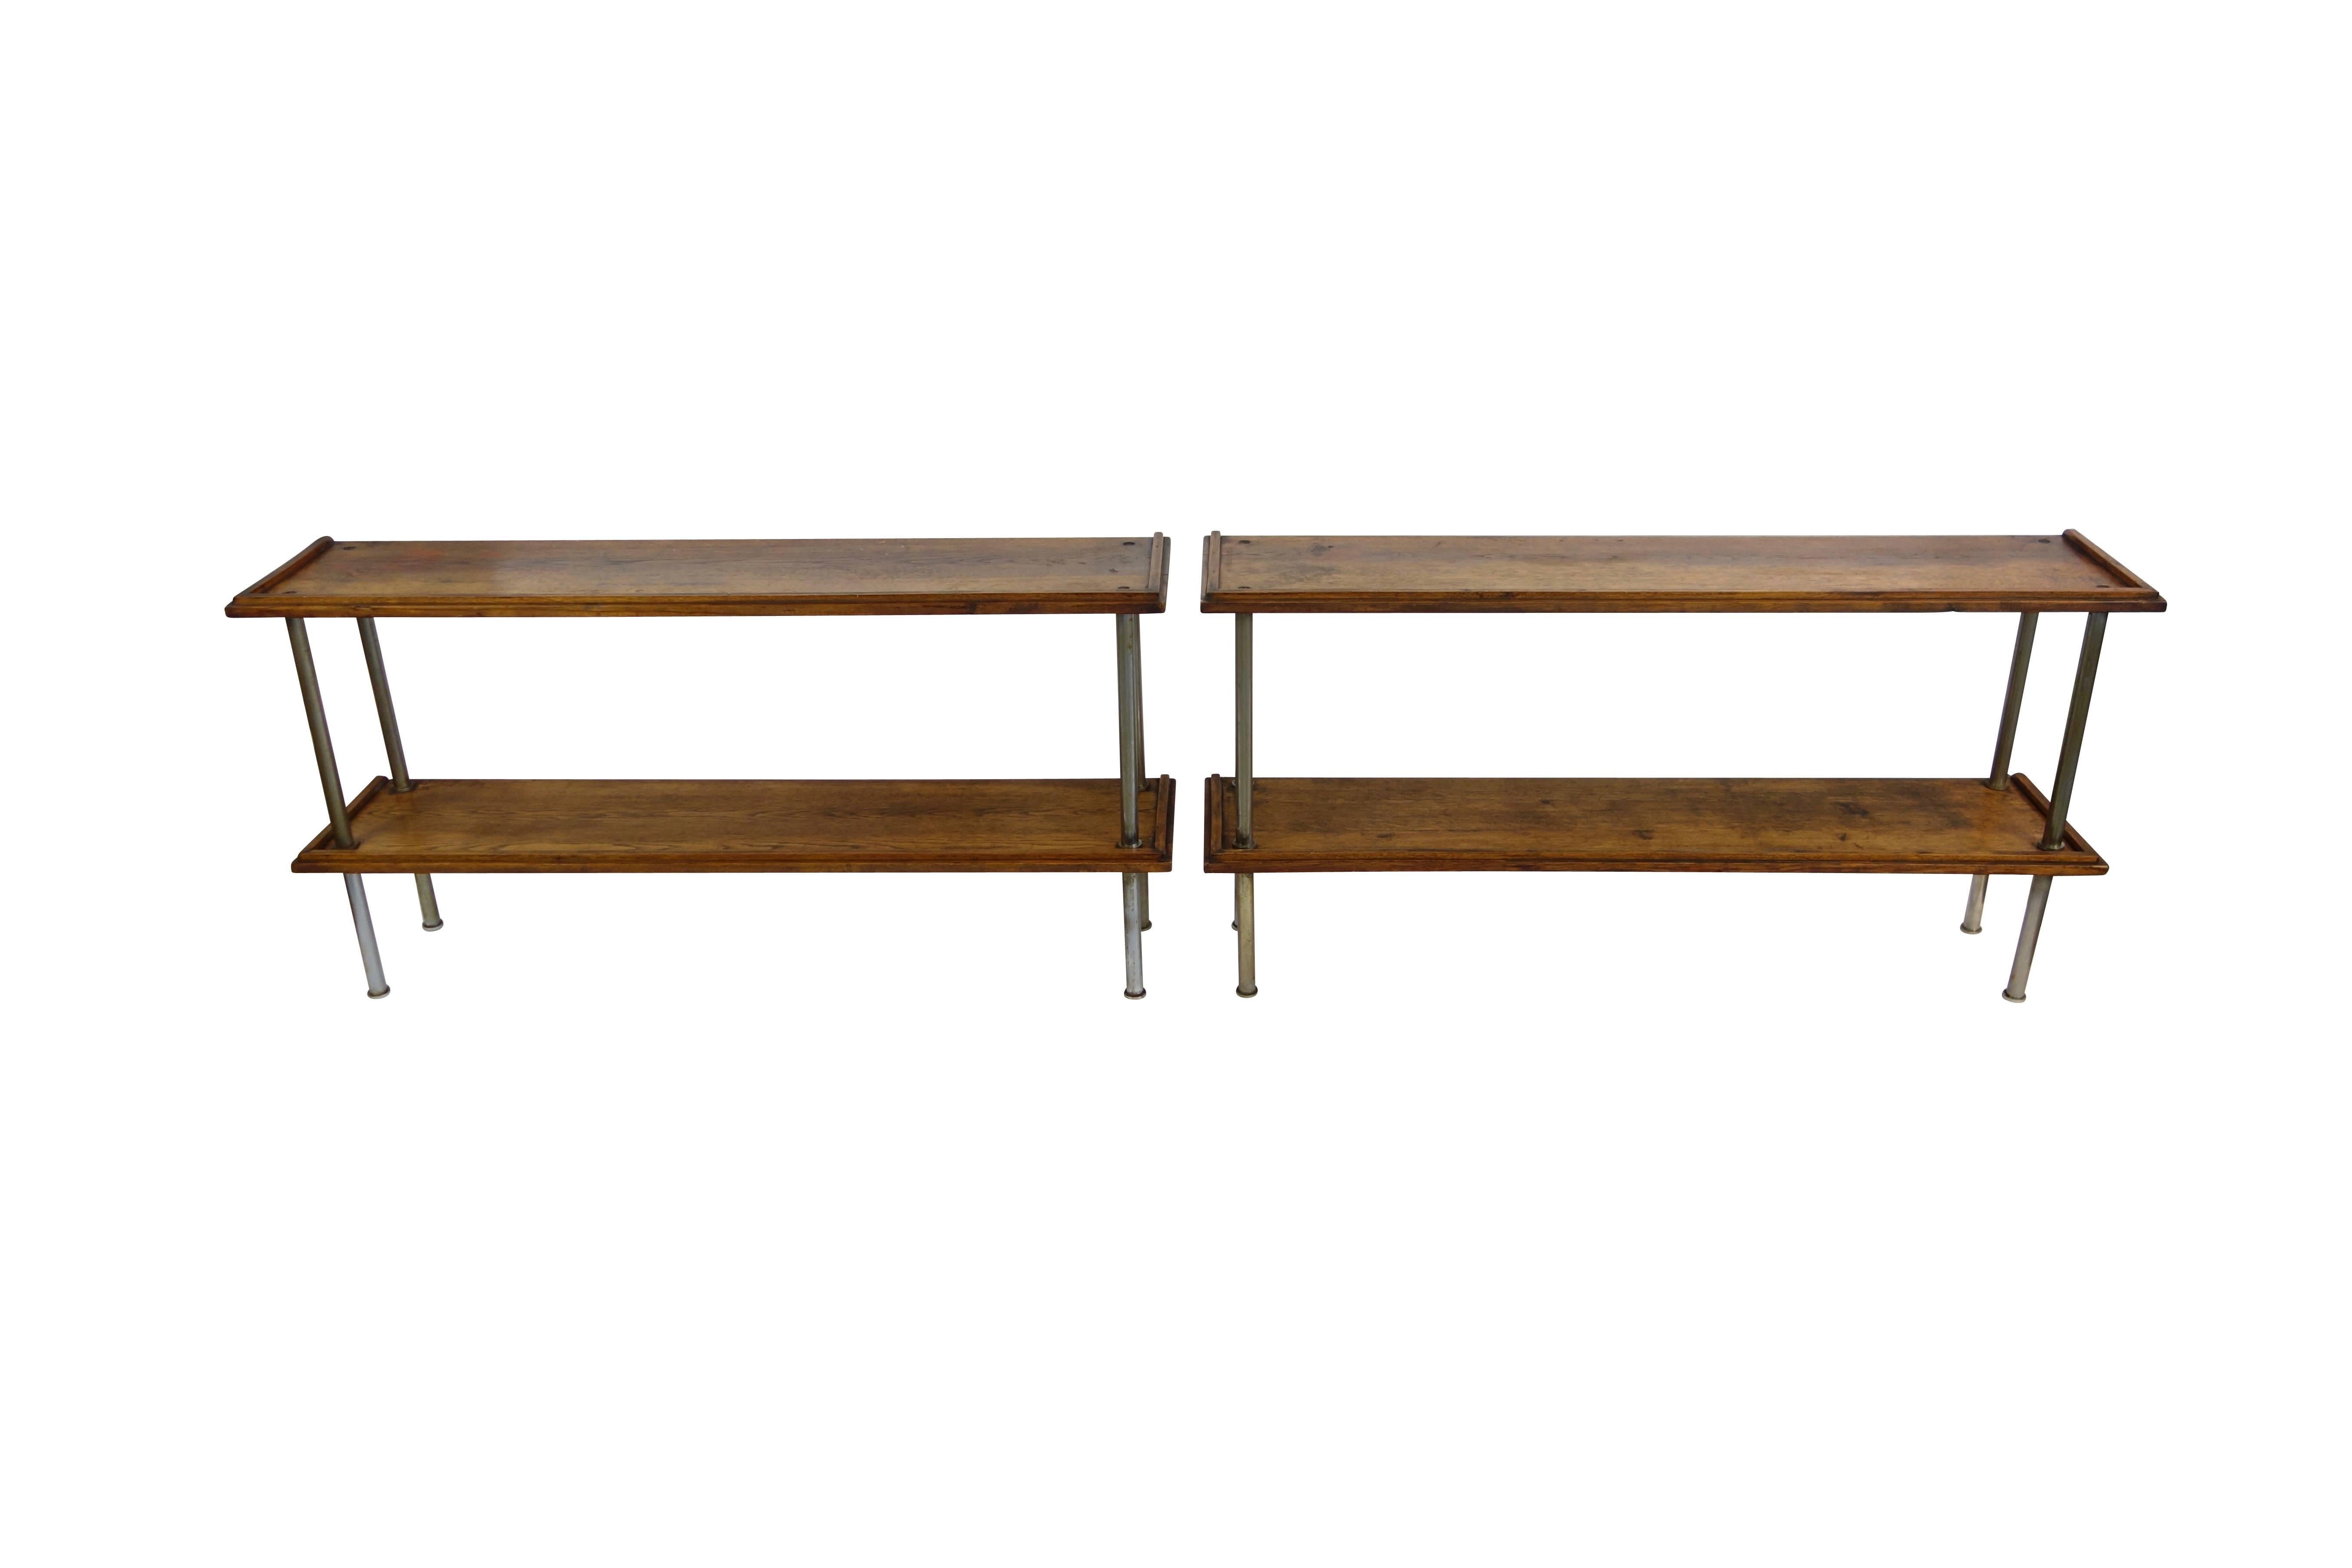 This is a fantastic pair of wood consoles with circular steel legs from France. These are so versatile; they can be stacked one on top of the other, set side by side making one long console, or abutted together back to back making one deeper